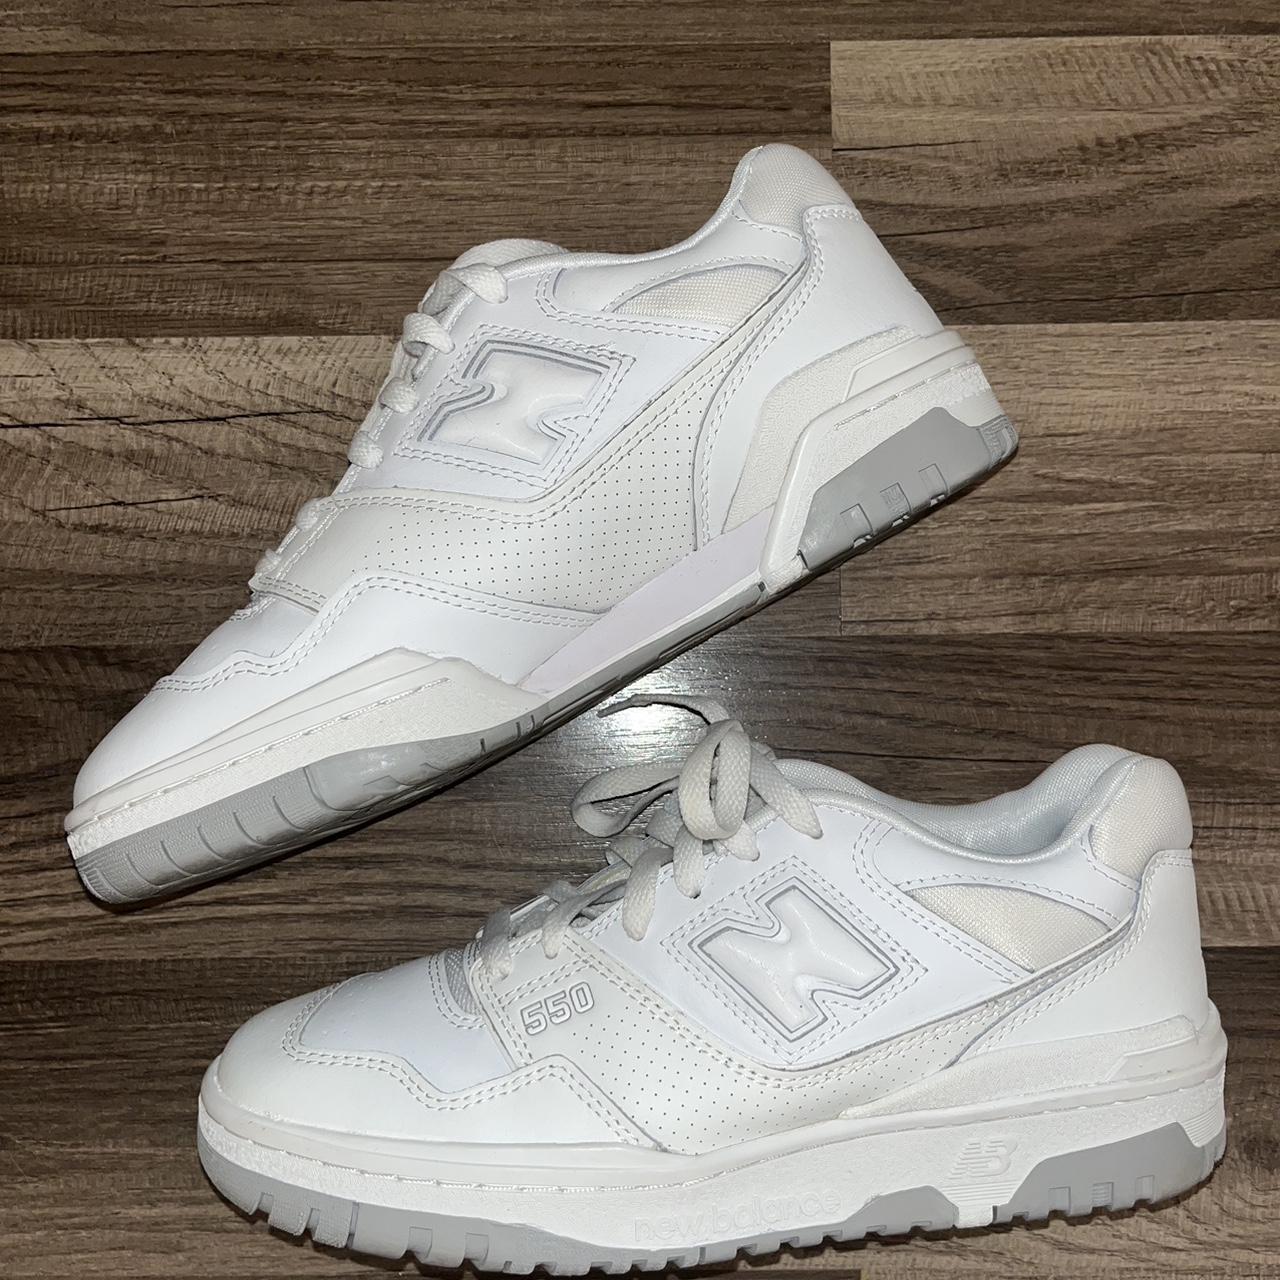 New Balance Men's White and Grey Trainers | Depop